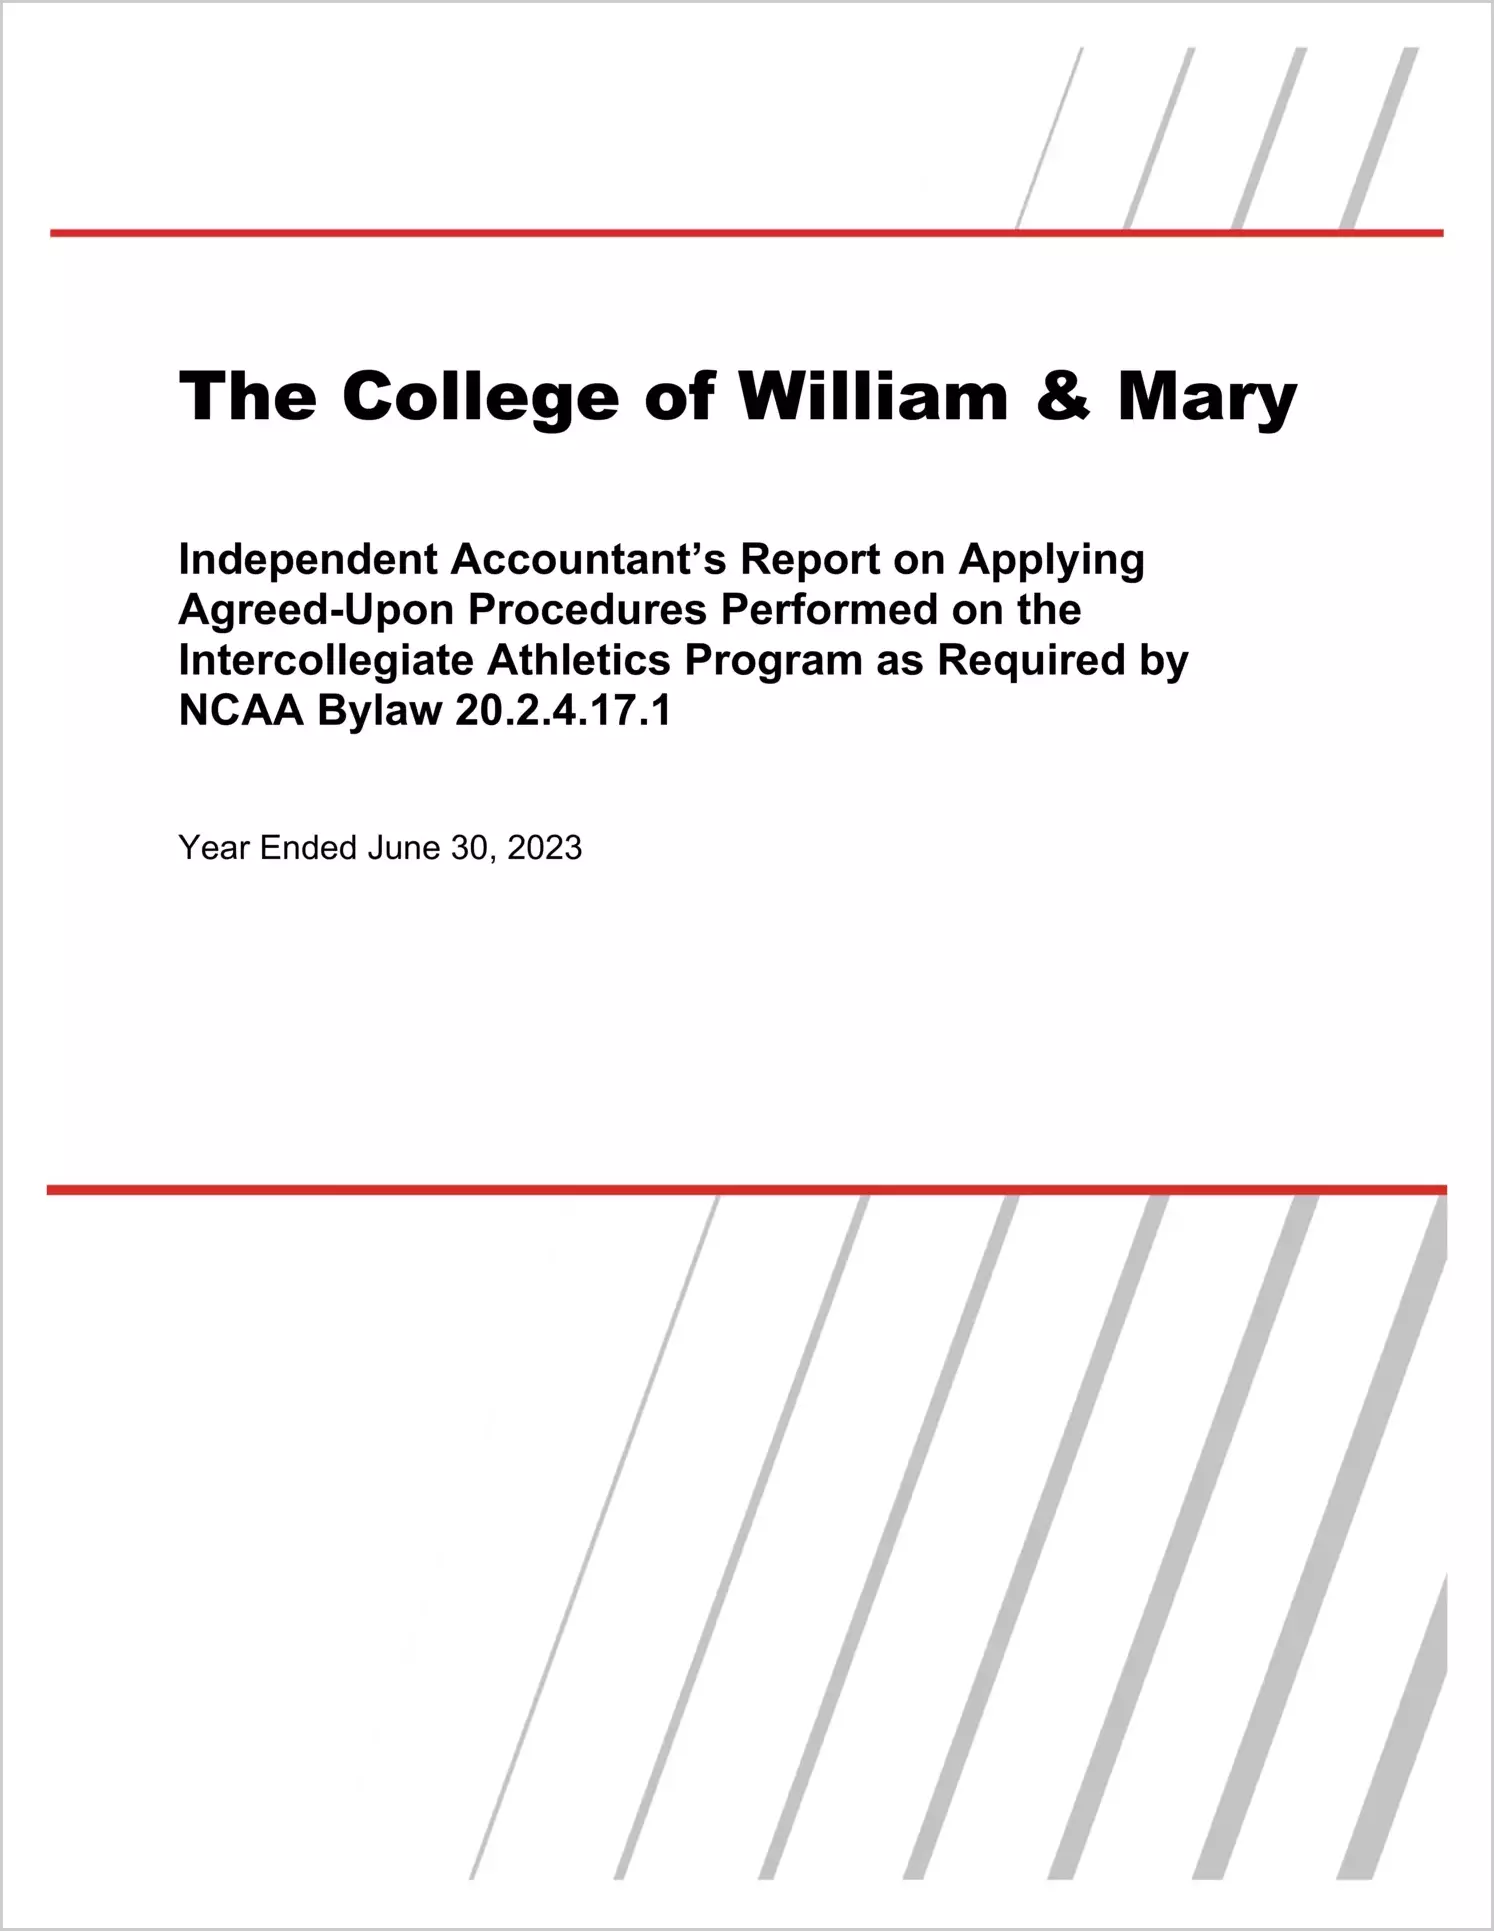 The College of William & Mary in Virginia Intercollegiate Athletics Programs for the year ended June 30, 2023